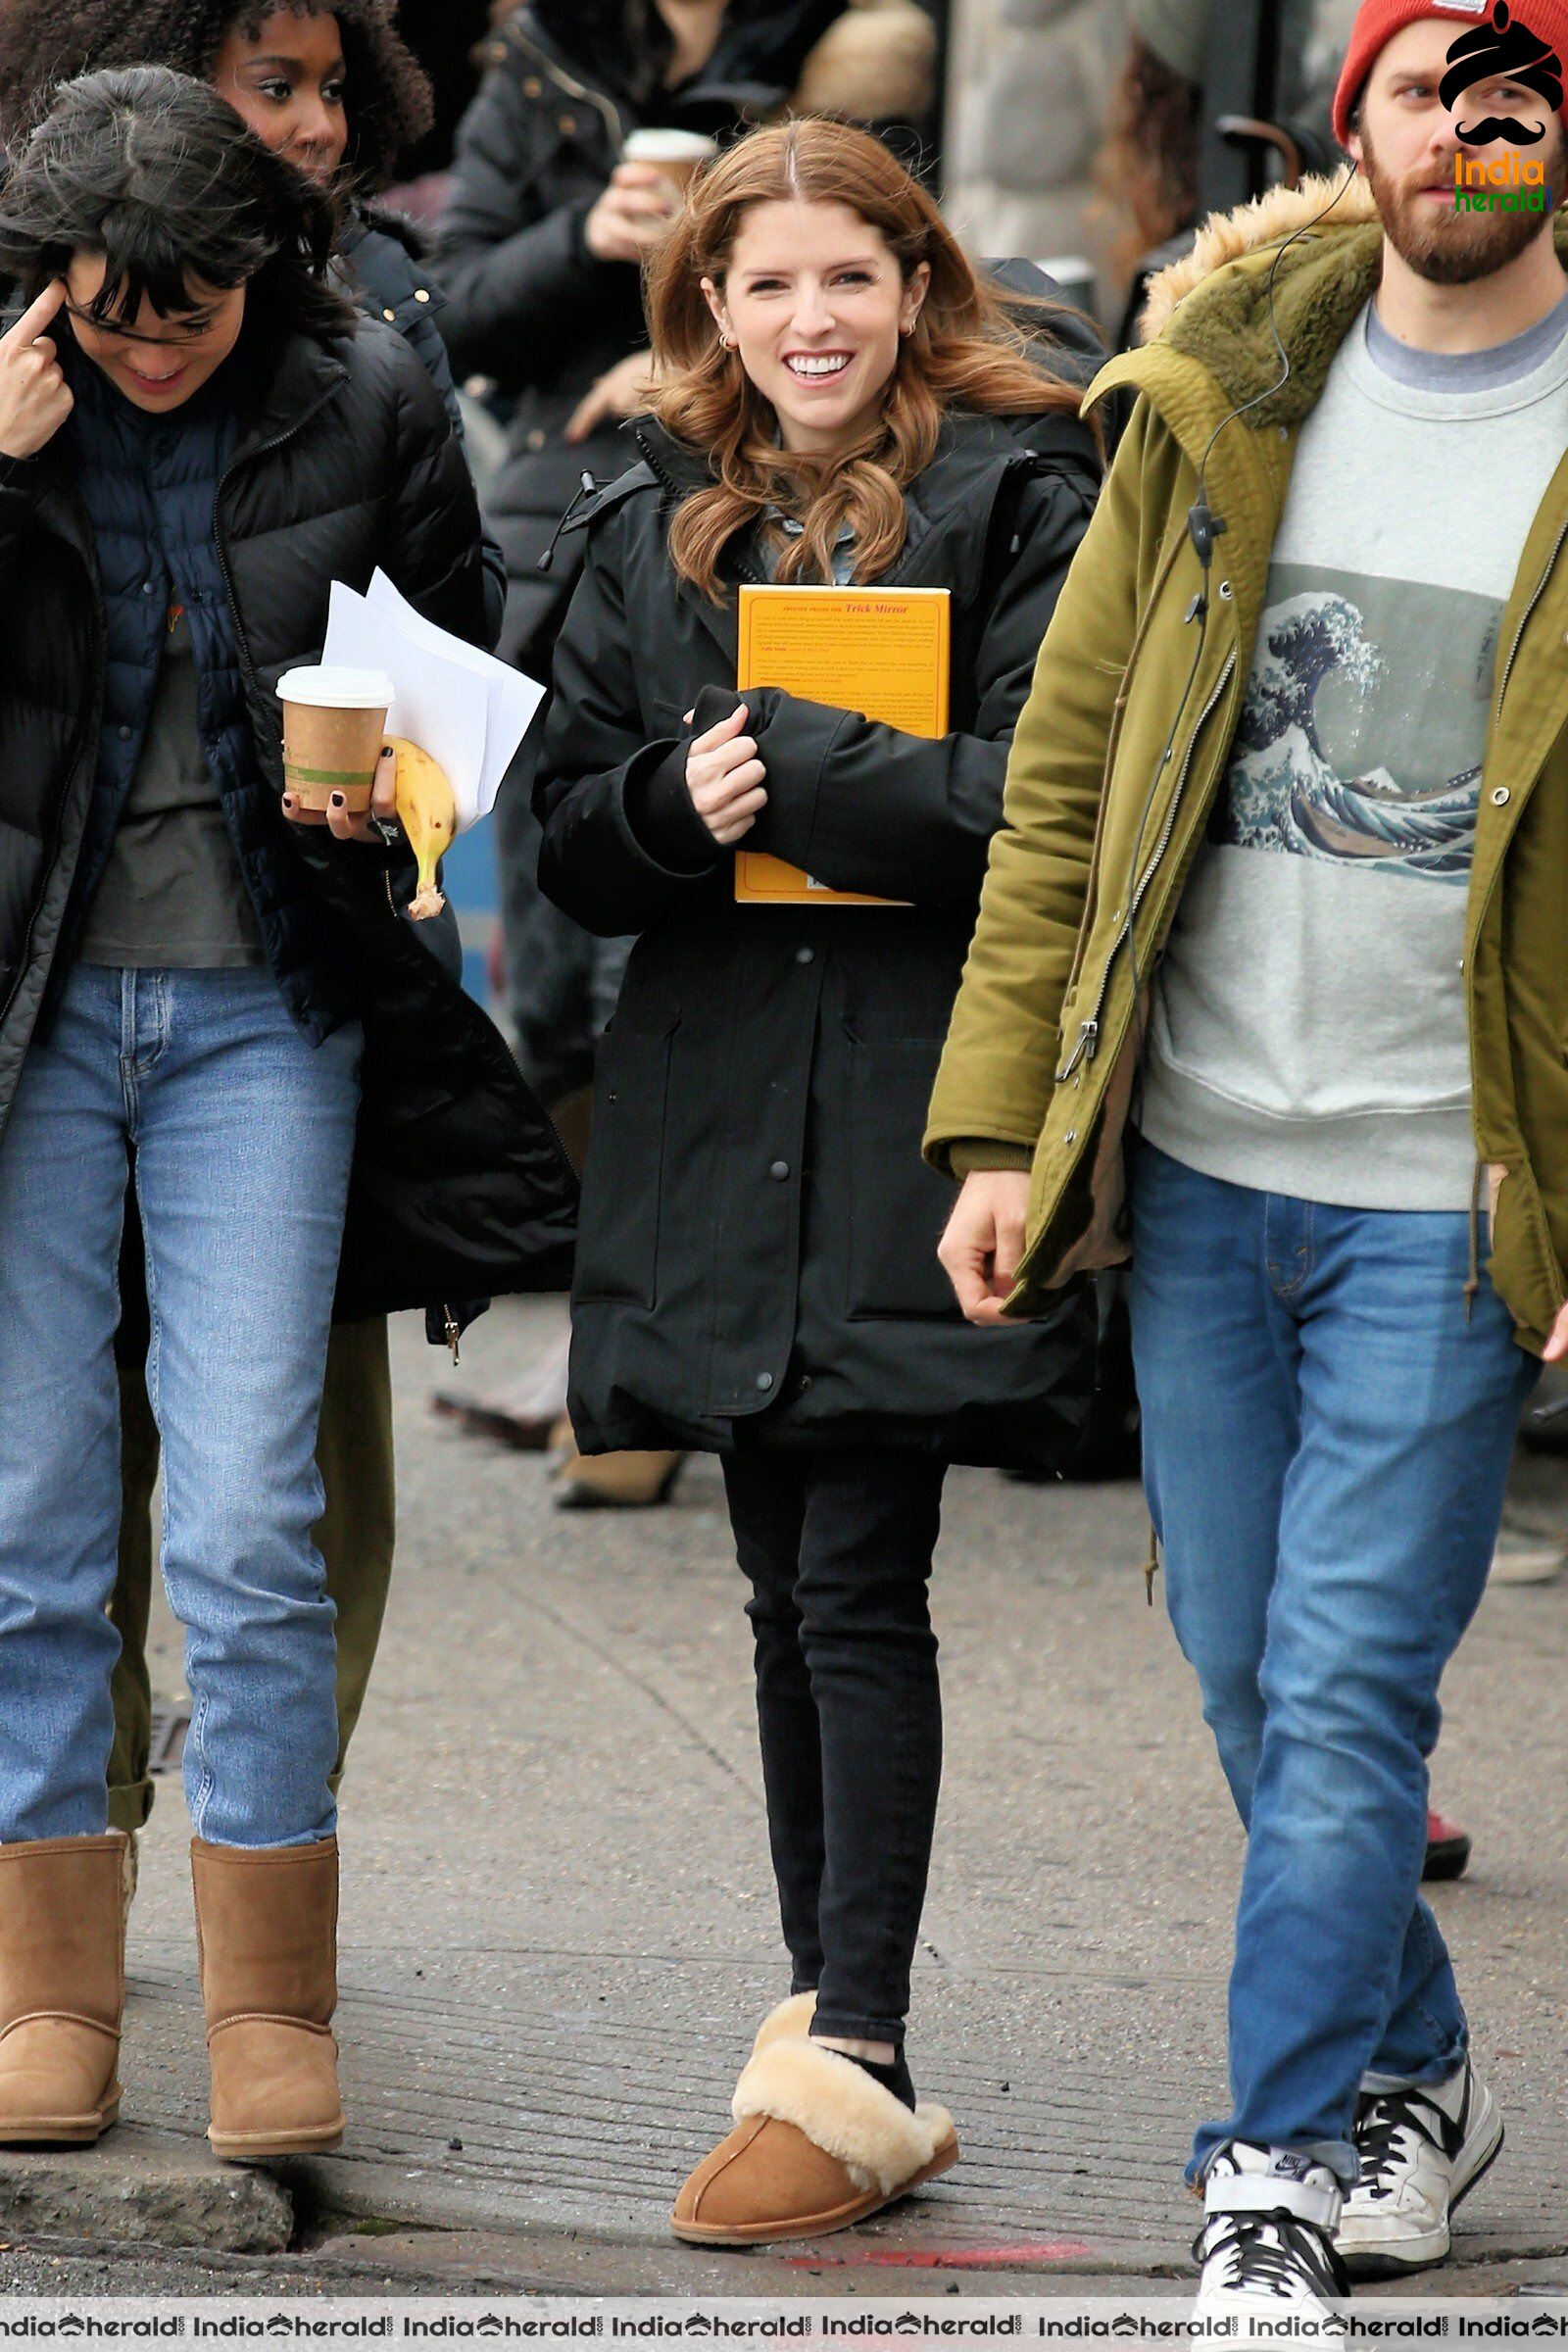 Anna Kendrick On the sets of Love Life in New York City